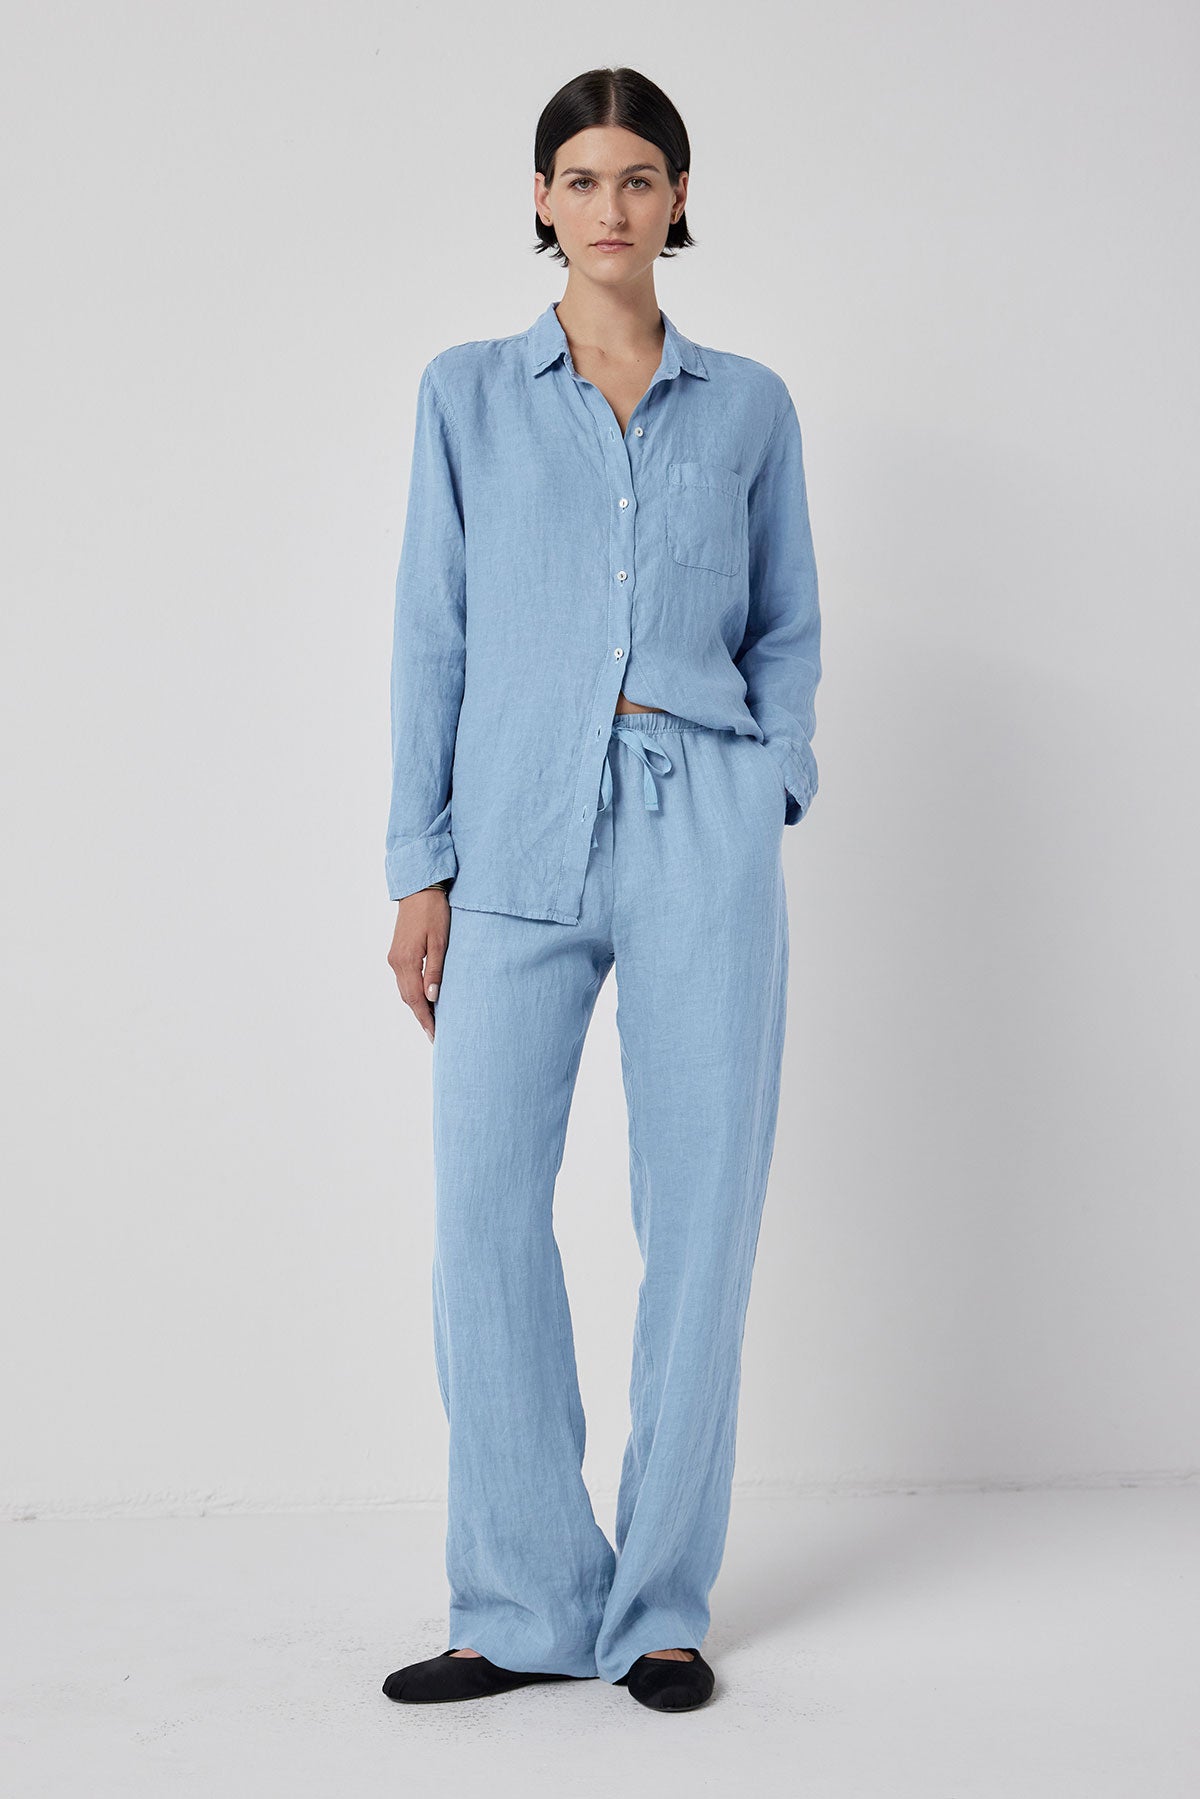 A person standing in a light blue linen shirt and matching Velvet by Jenny Graham PICO PANTS, paired with black flat shoes, against a white backdrop.-36212497875137